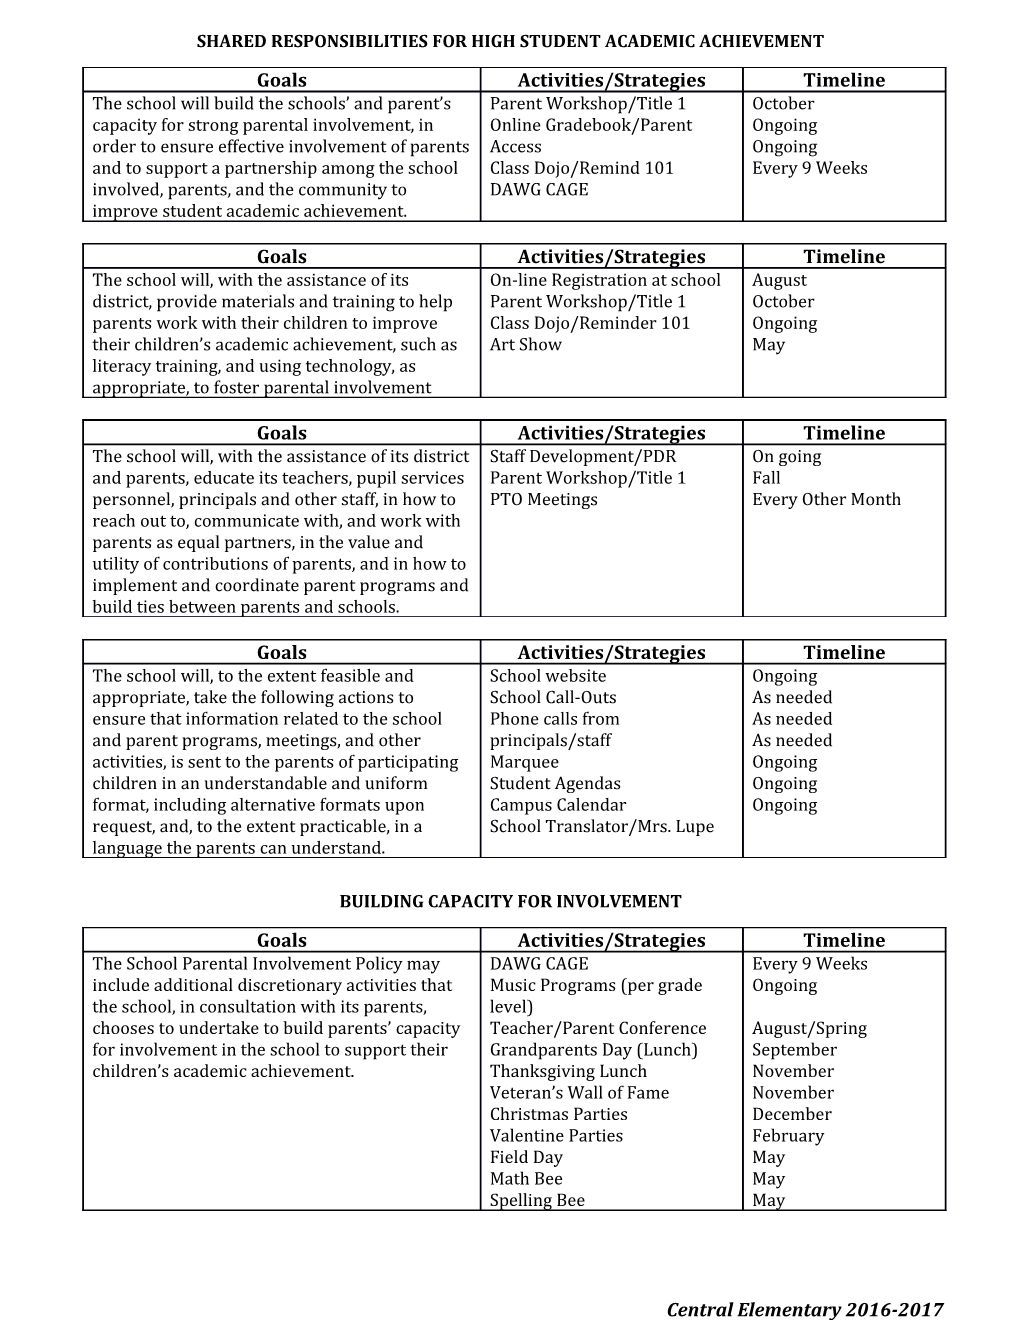 School Implementation of Required Parental Involvement Policy Components